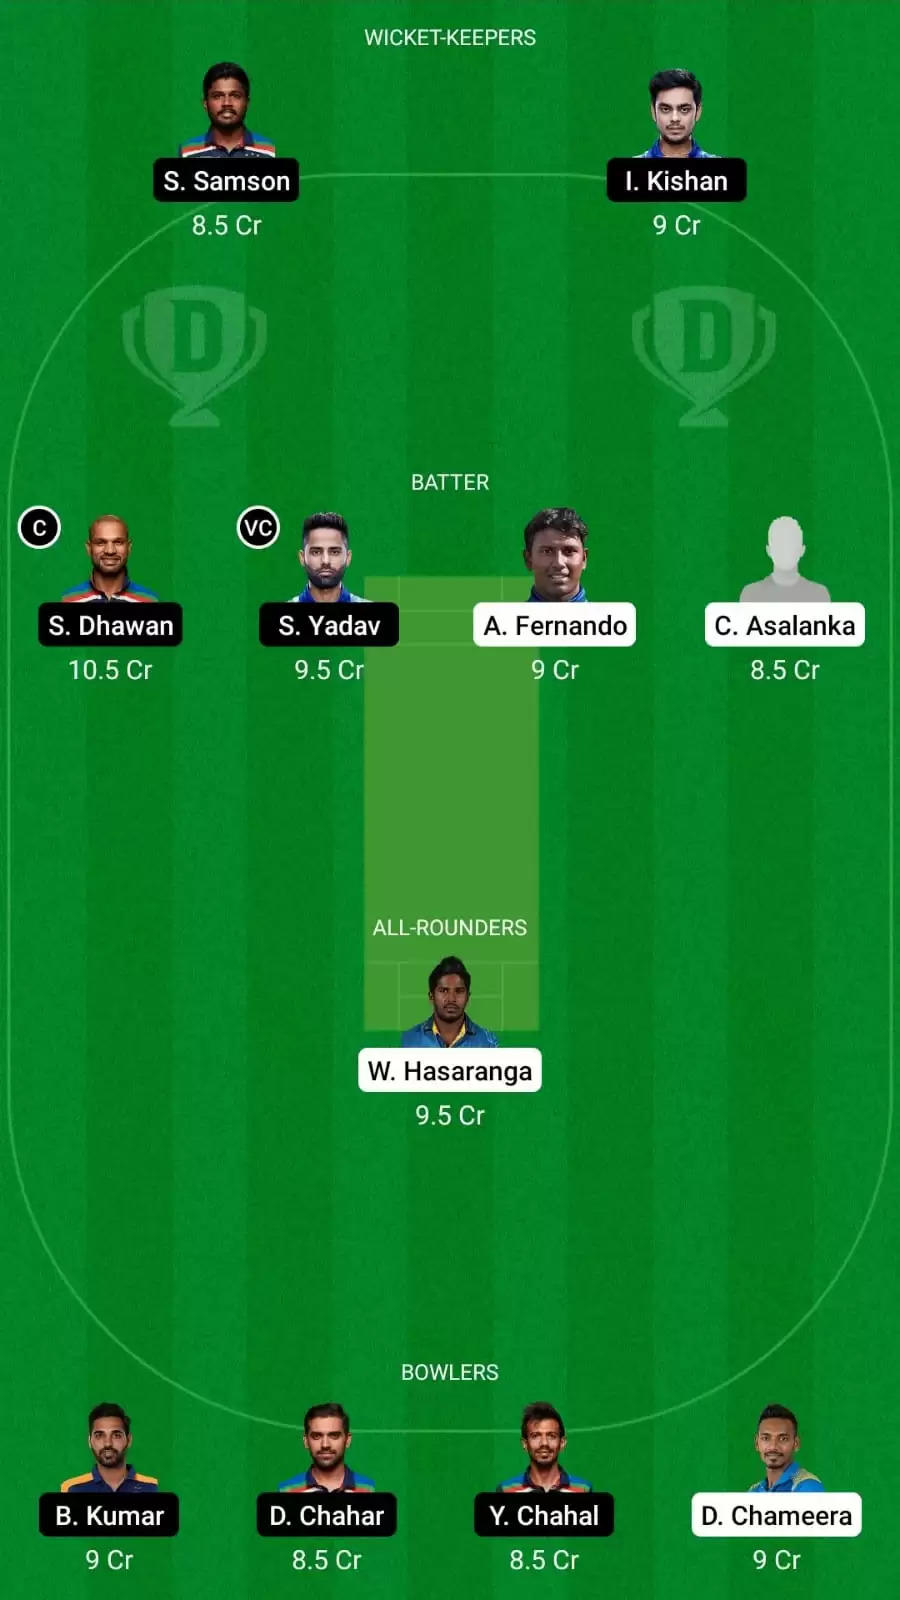 SL vs IND Dream11 Team Prediction for 2nd T20I: Sri Lanka vs India Best Fantasy Cricket Tips, Strongest Playing XI, Pitch Report and Player Updates